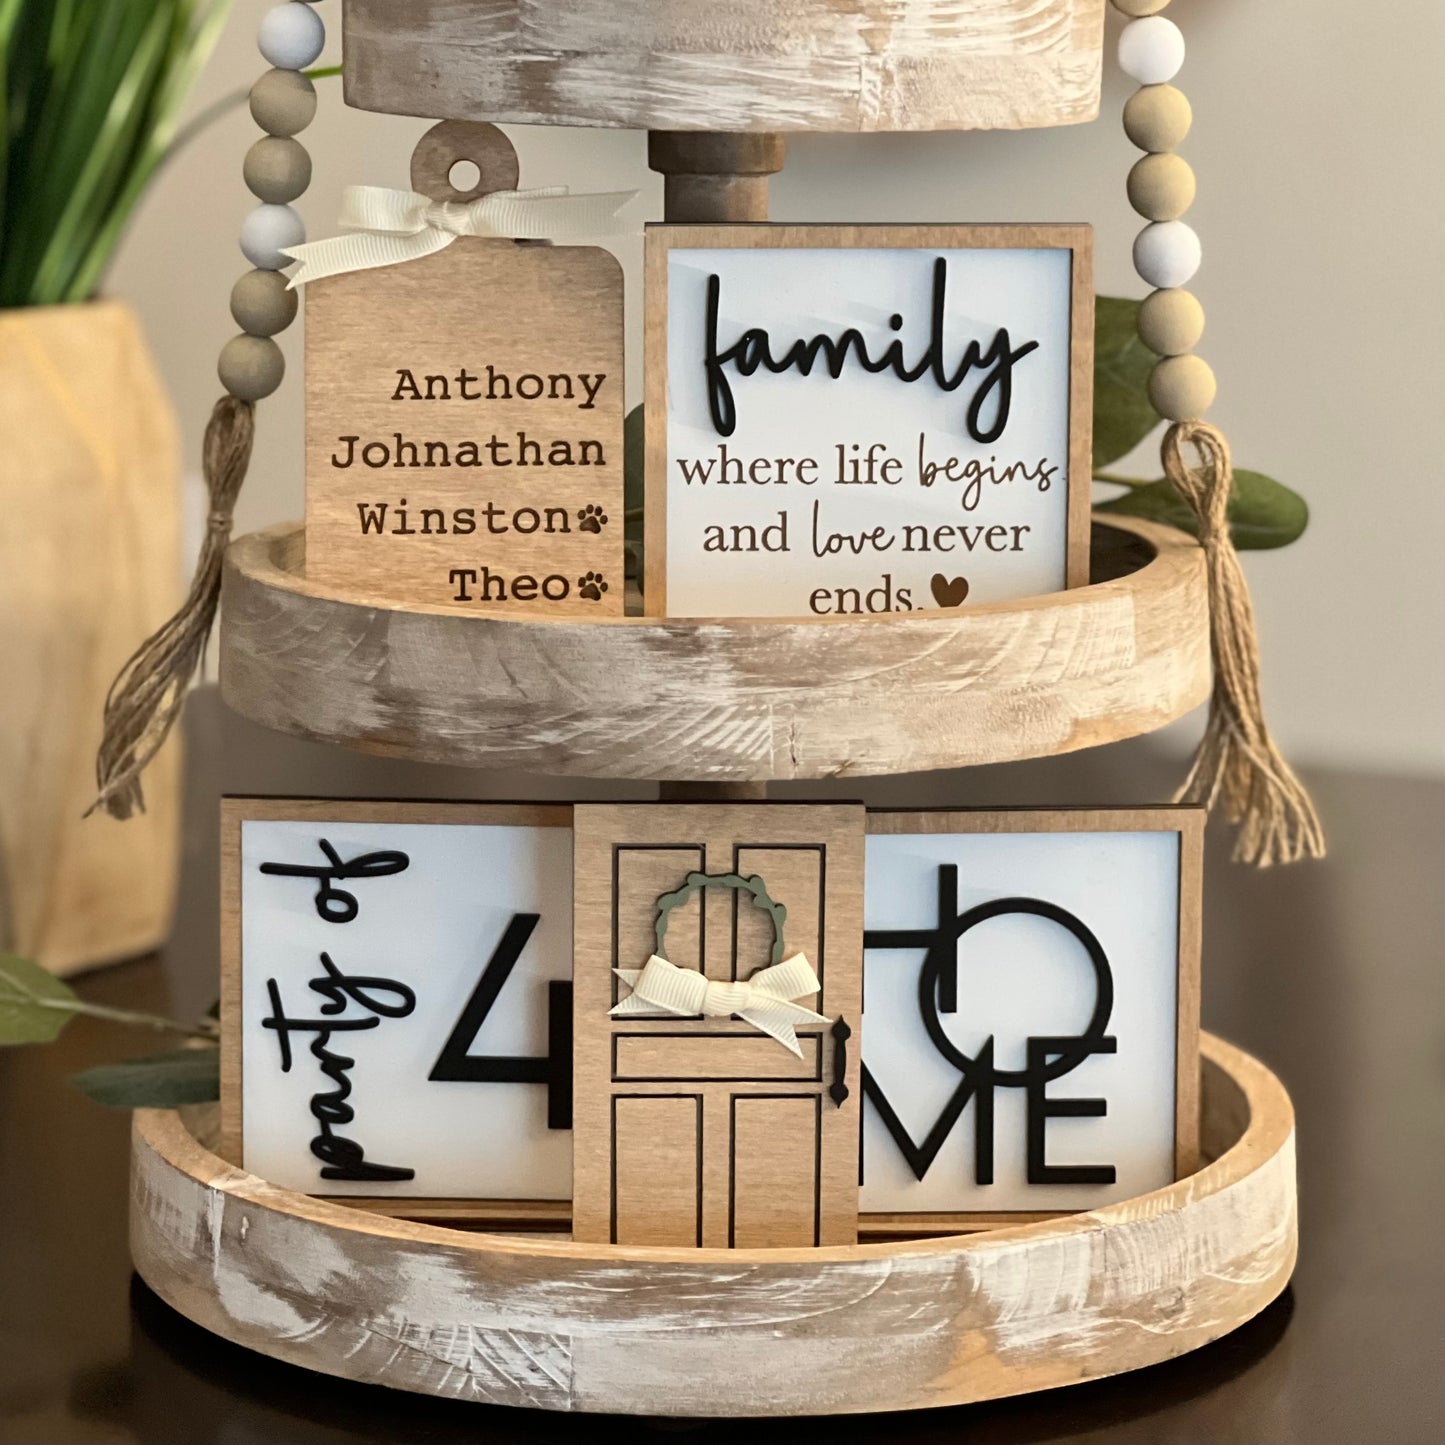 Family & Home Tiered Tray Decor Bundle